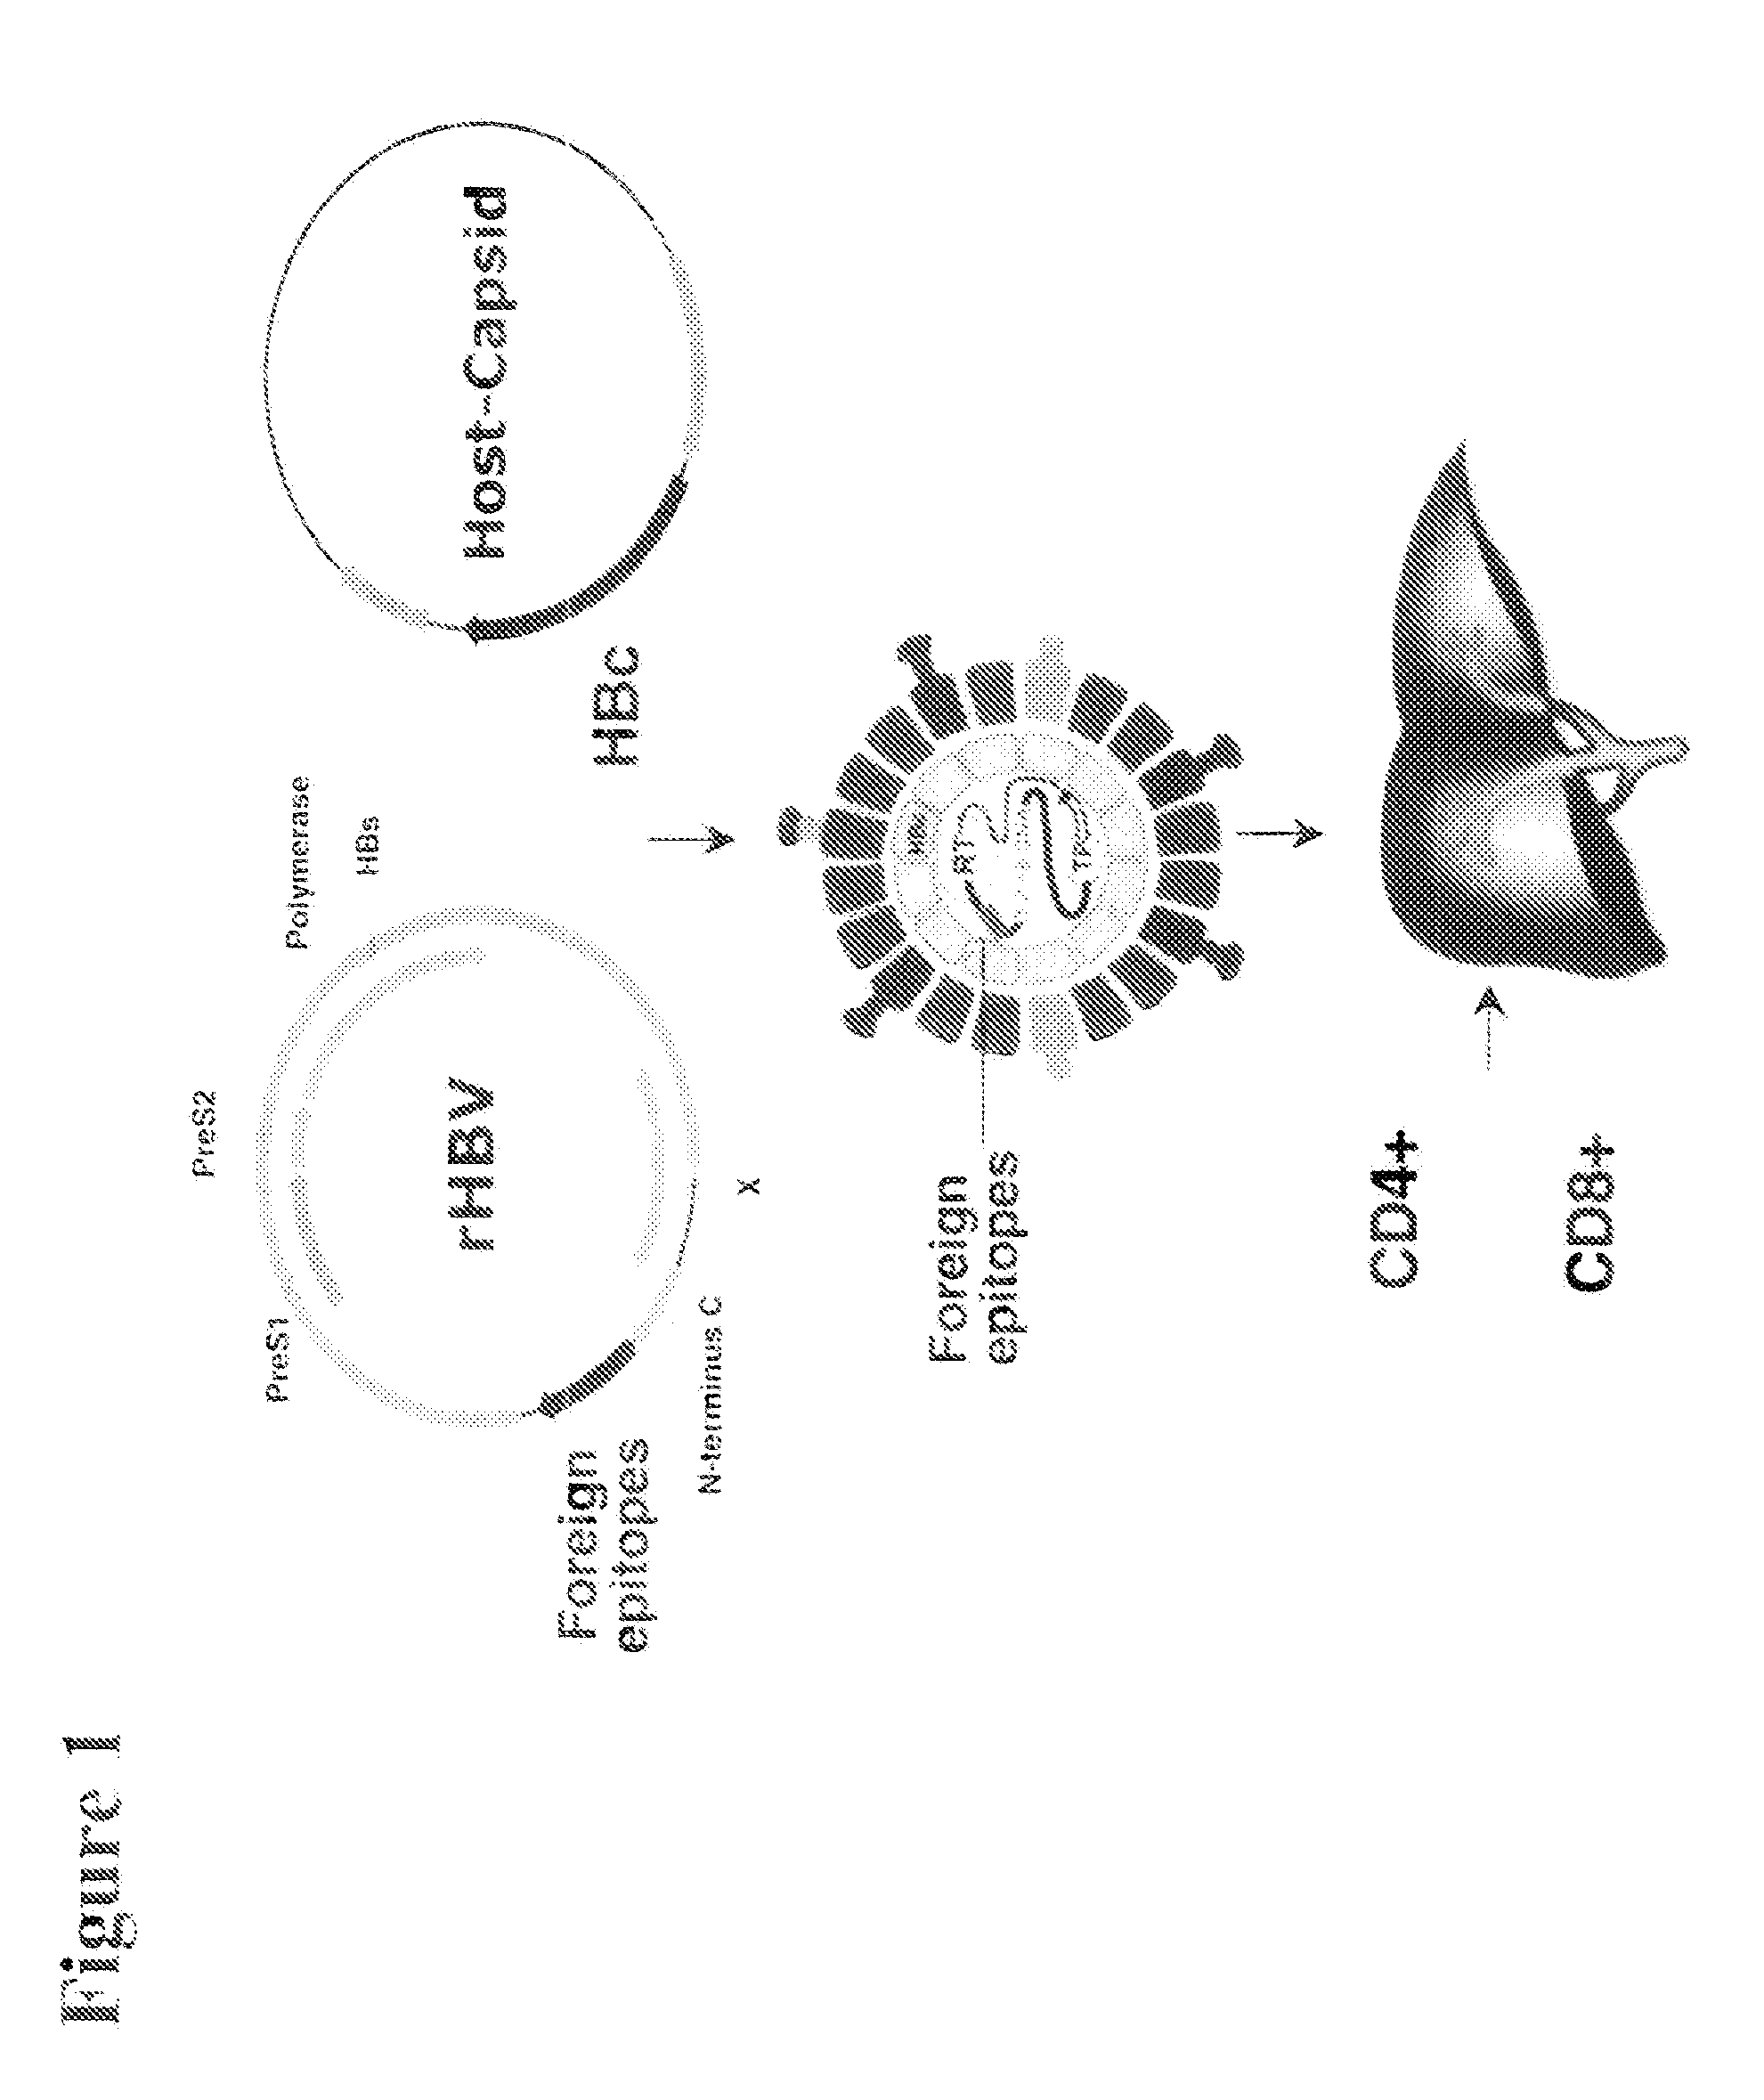 Polynucleotides allowing the expression and secretion of recombinant pseudo-virus containing foreign epitopes, their production, and use